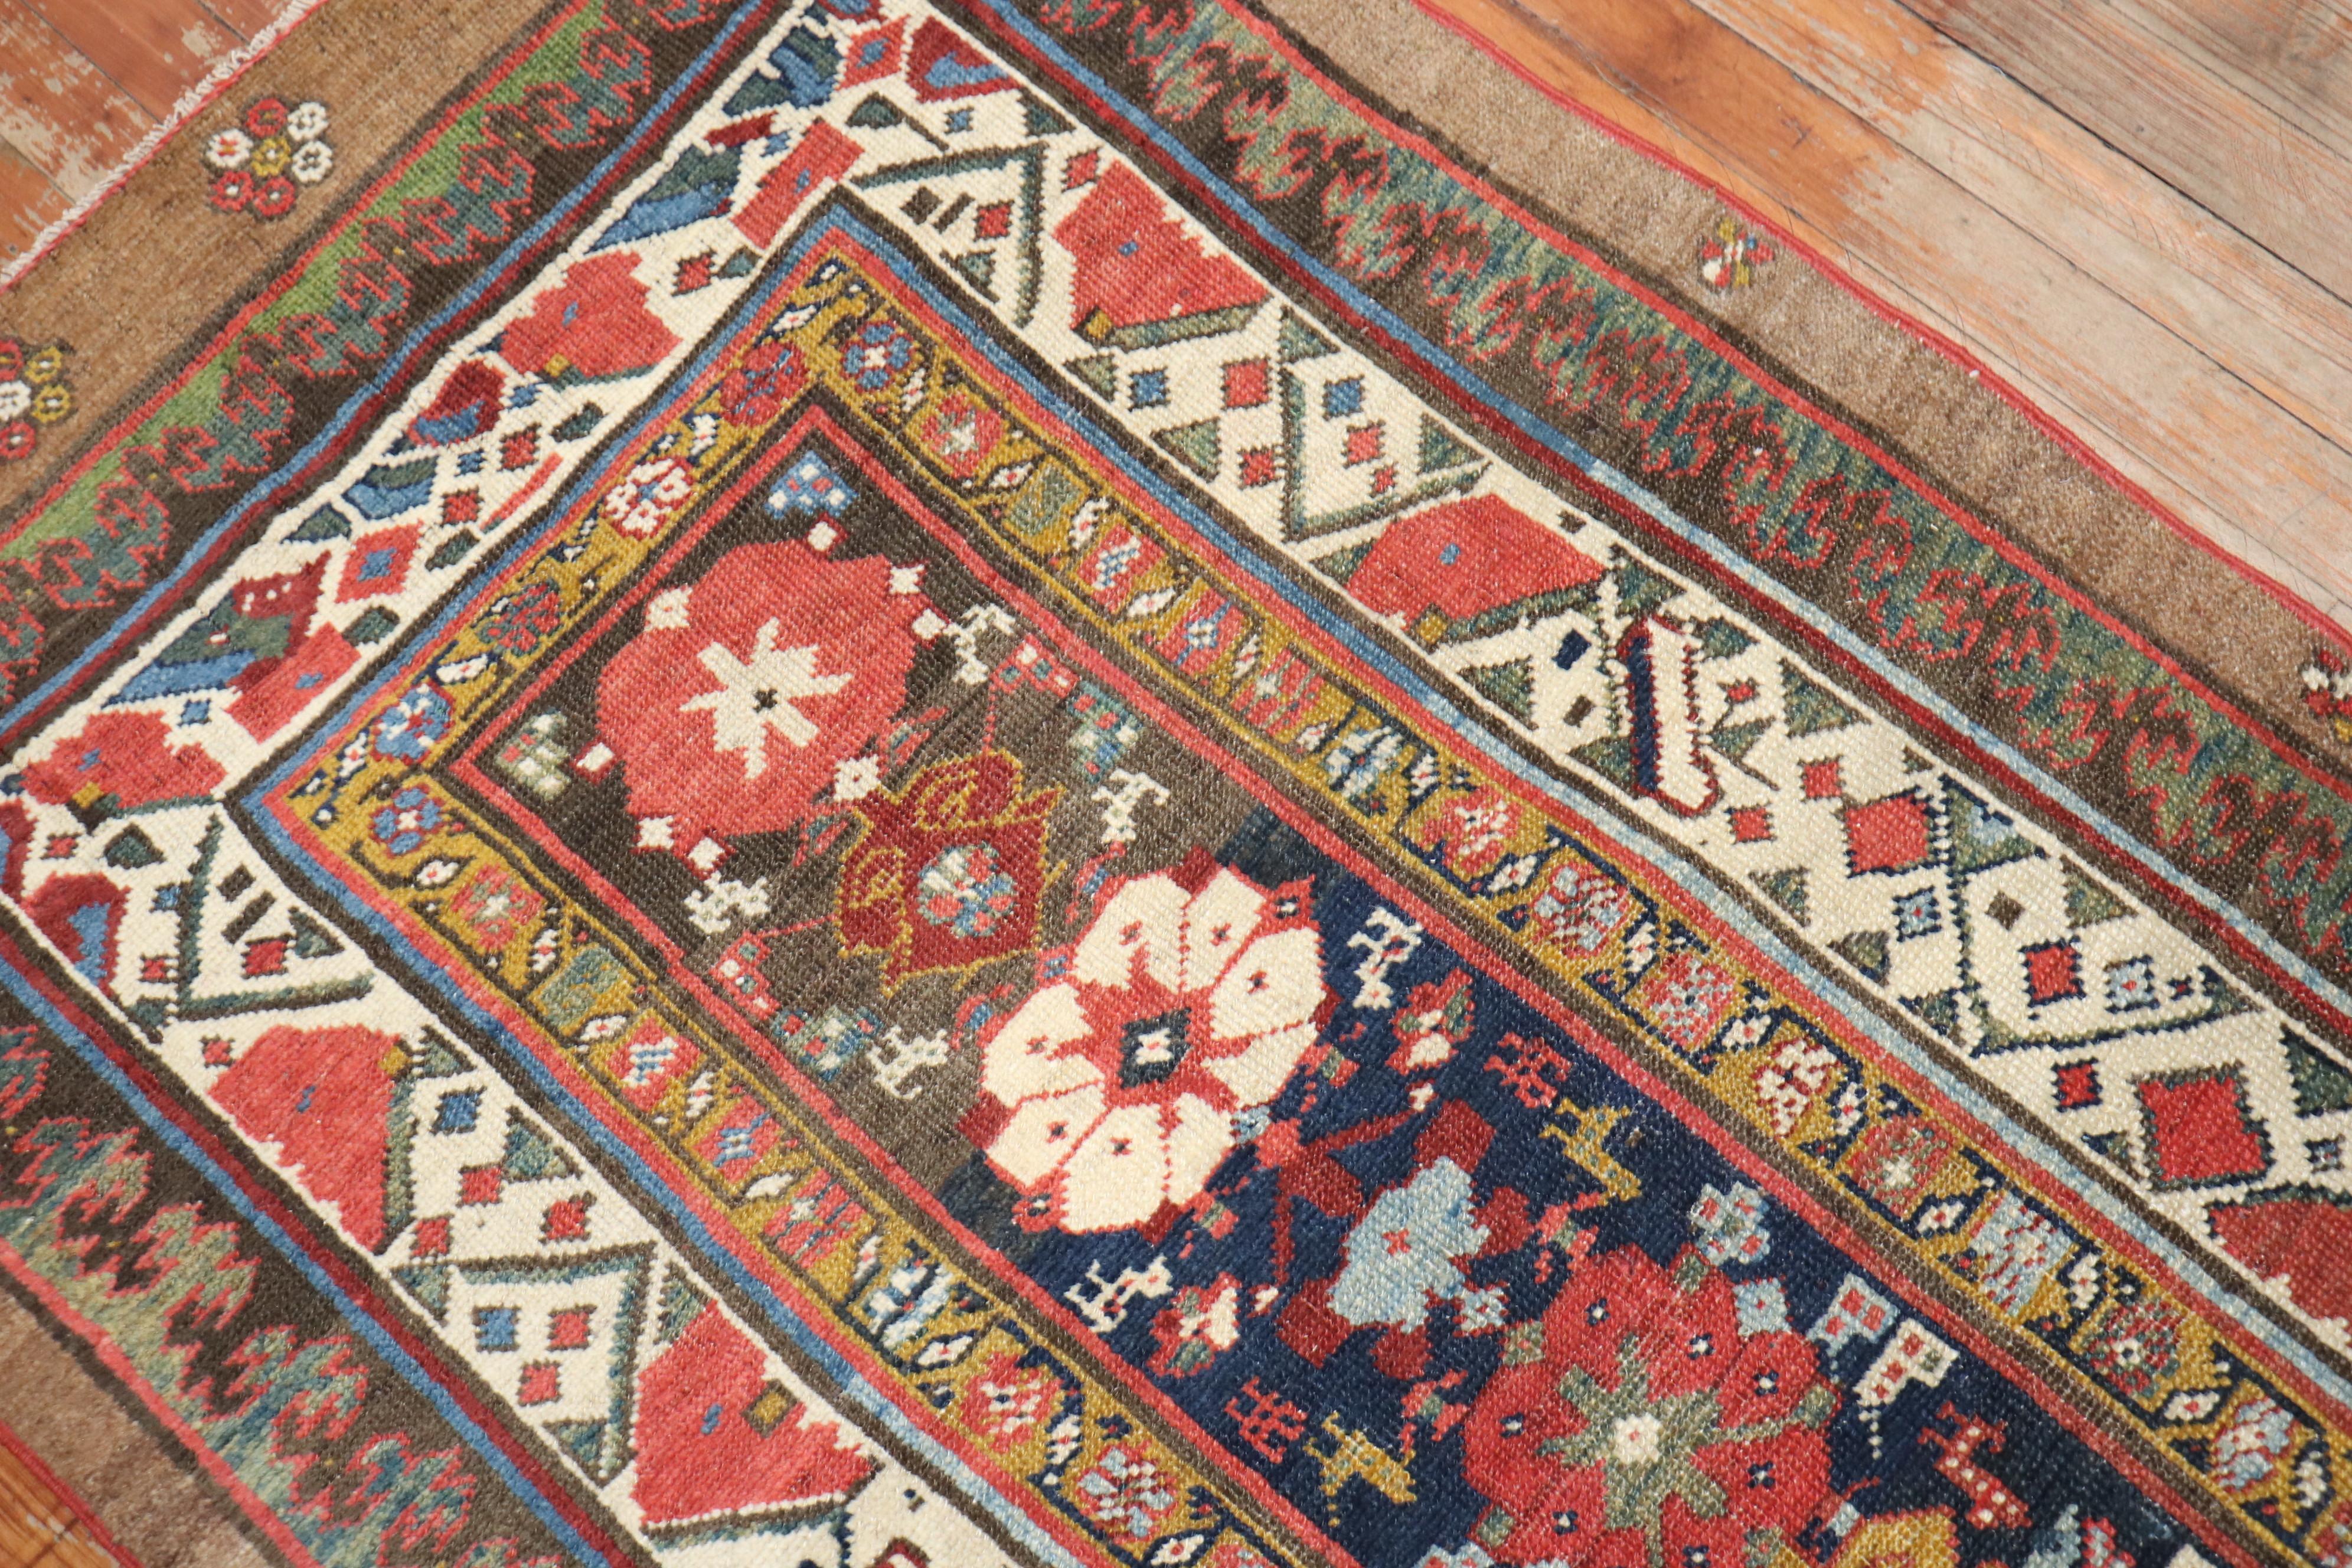 An early 20th century Persian Serab Decorative Tribal Runner

Measures: 2'10'' x 12'4''